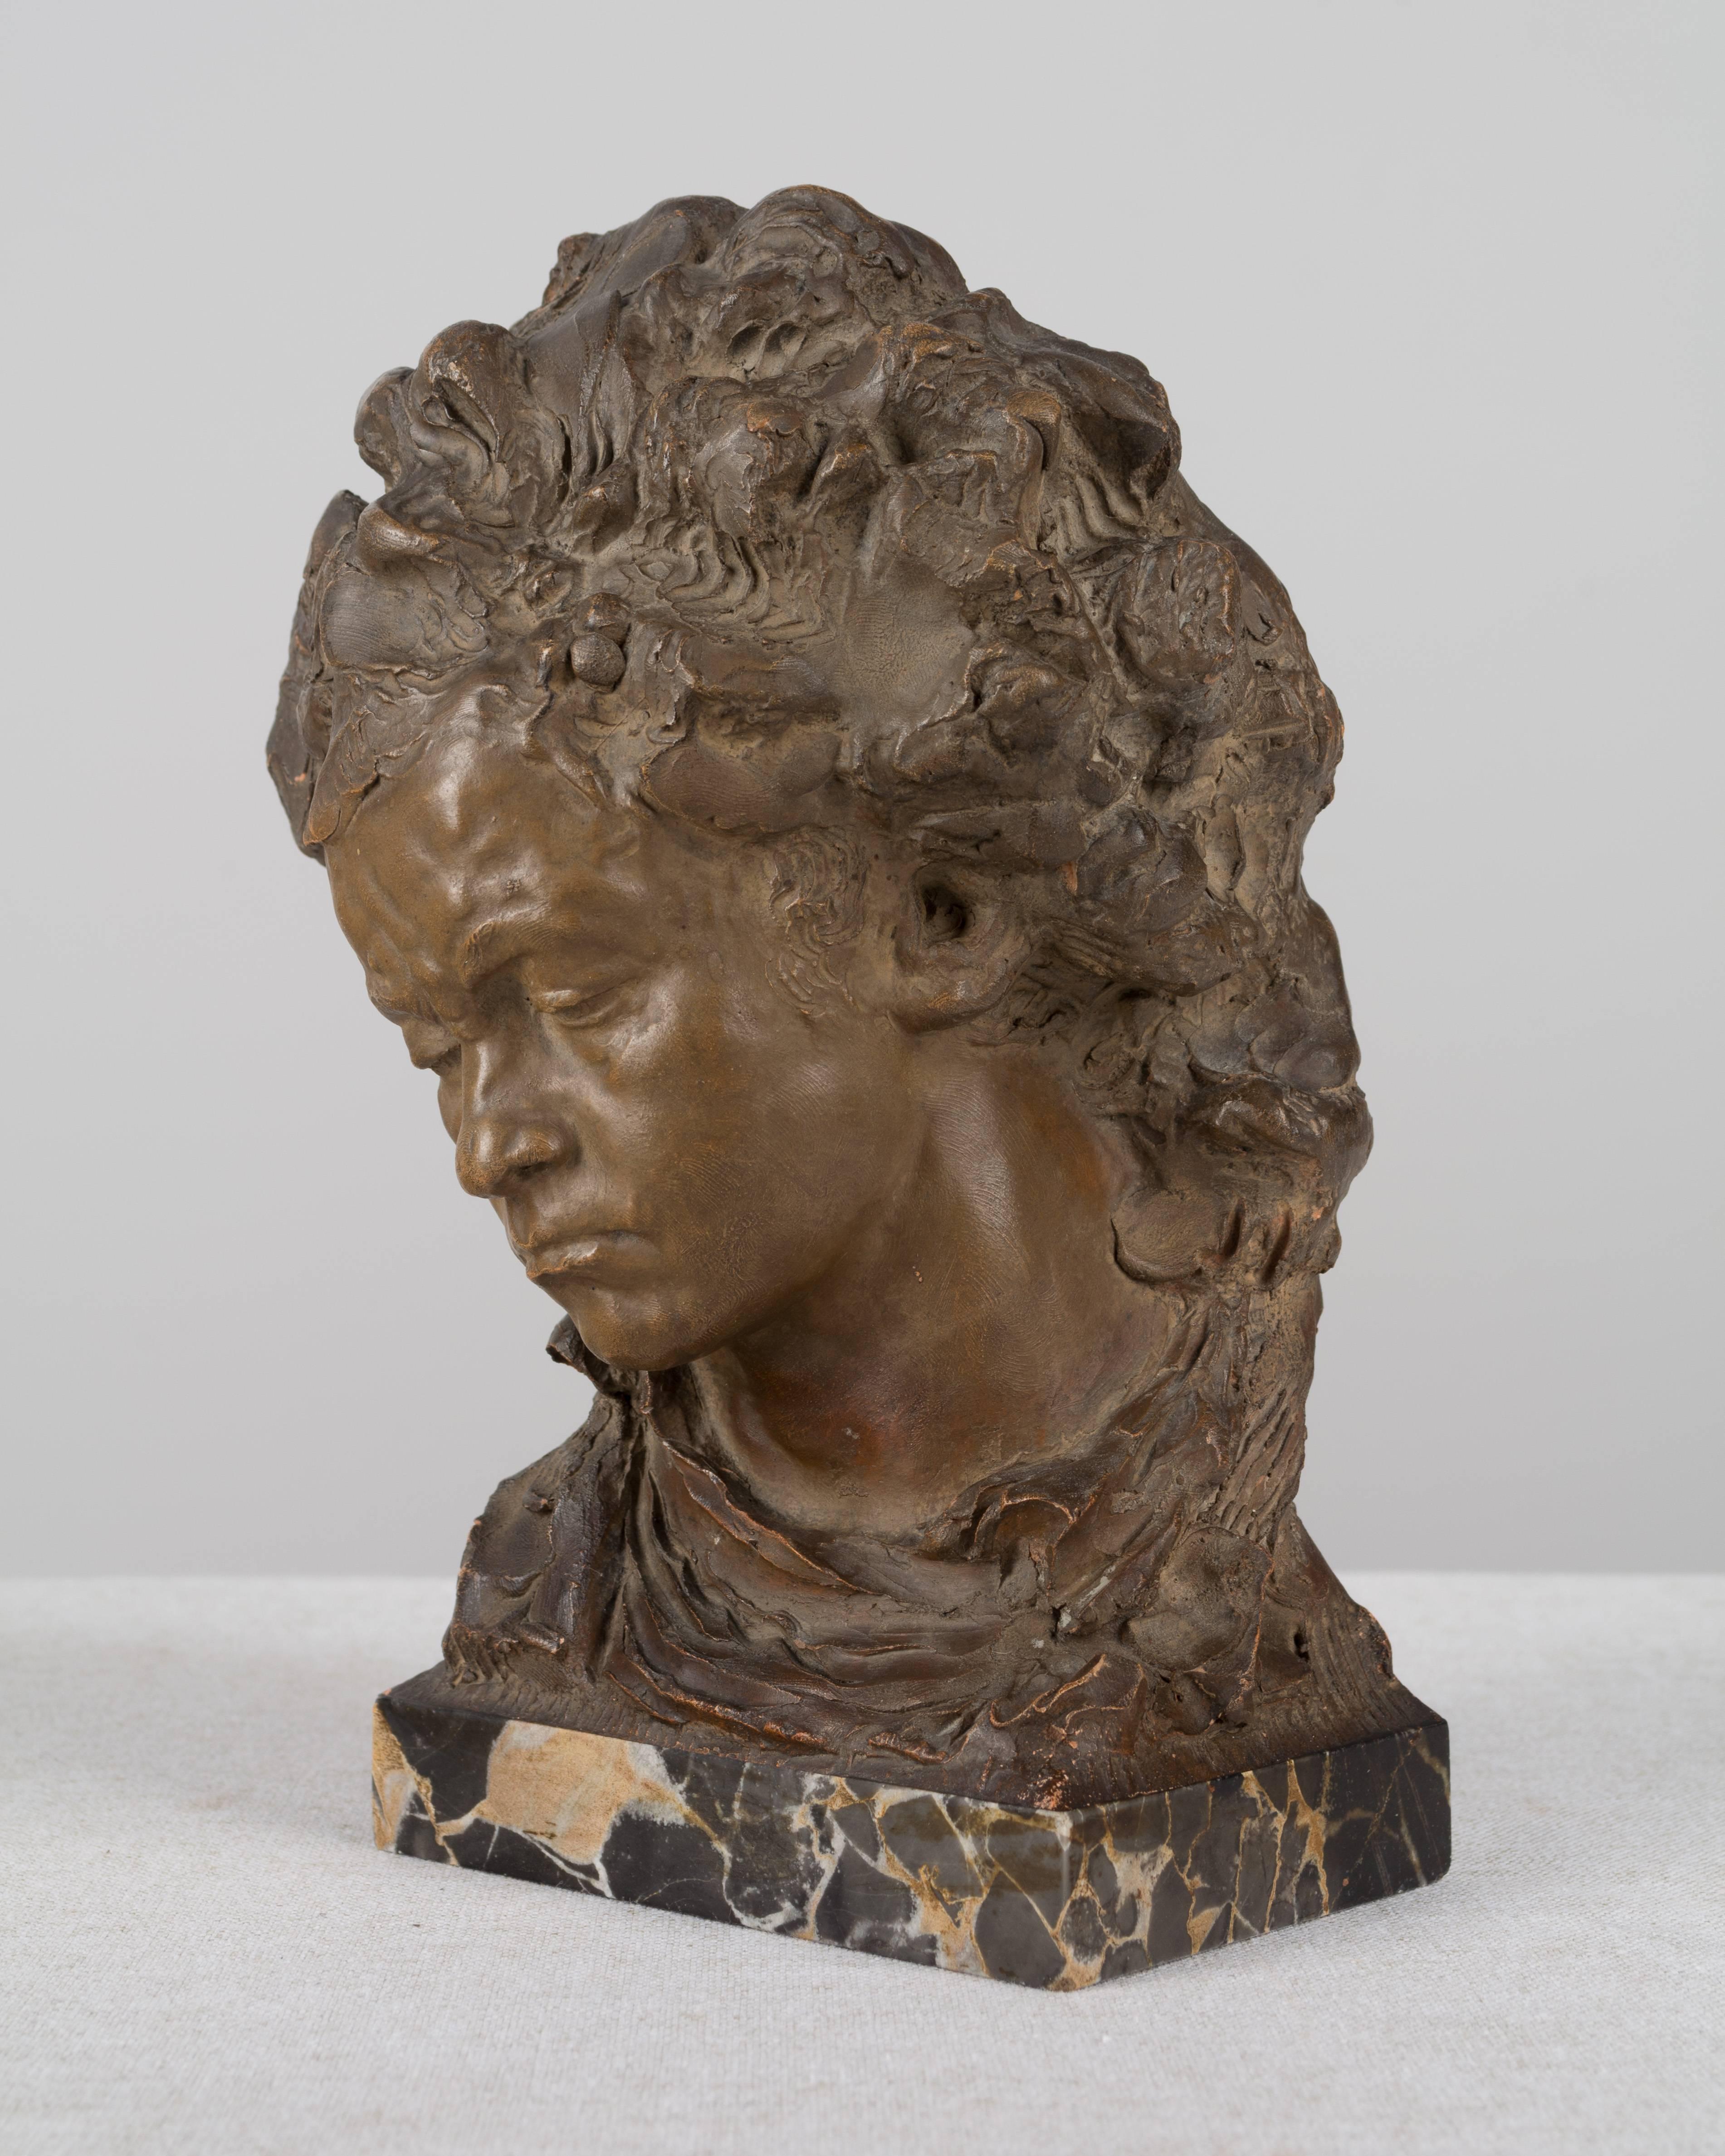 A small bust of Beethoven by Italian artist Fernando Ciancainianni (1886-1954). Terra cotta on marble base. Signed Fernand Cian, Paris and inscribed SALON 1923. Measures: 9 high x 6.5 wide 5 deep Weight: 4.5 lbs.
More photos available upon request.